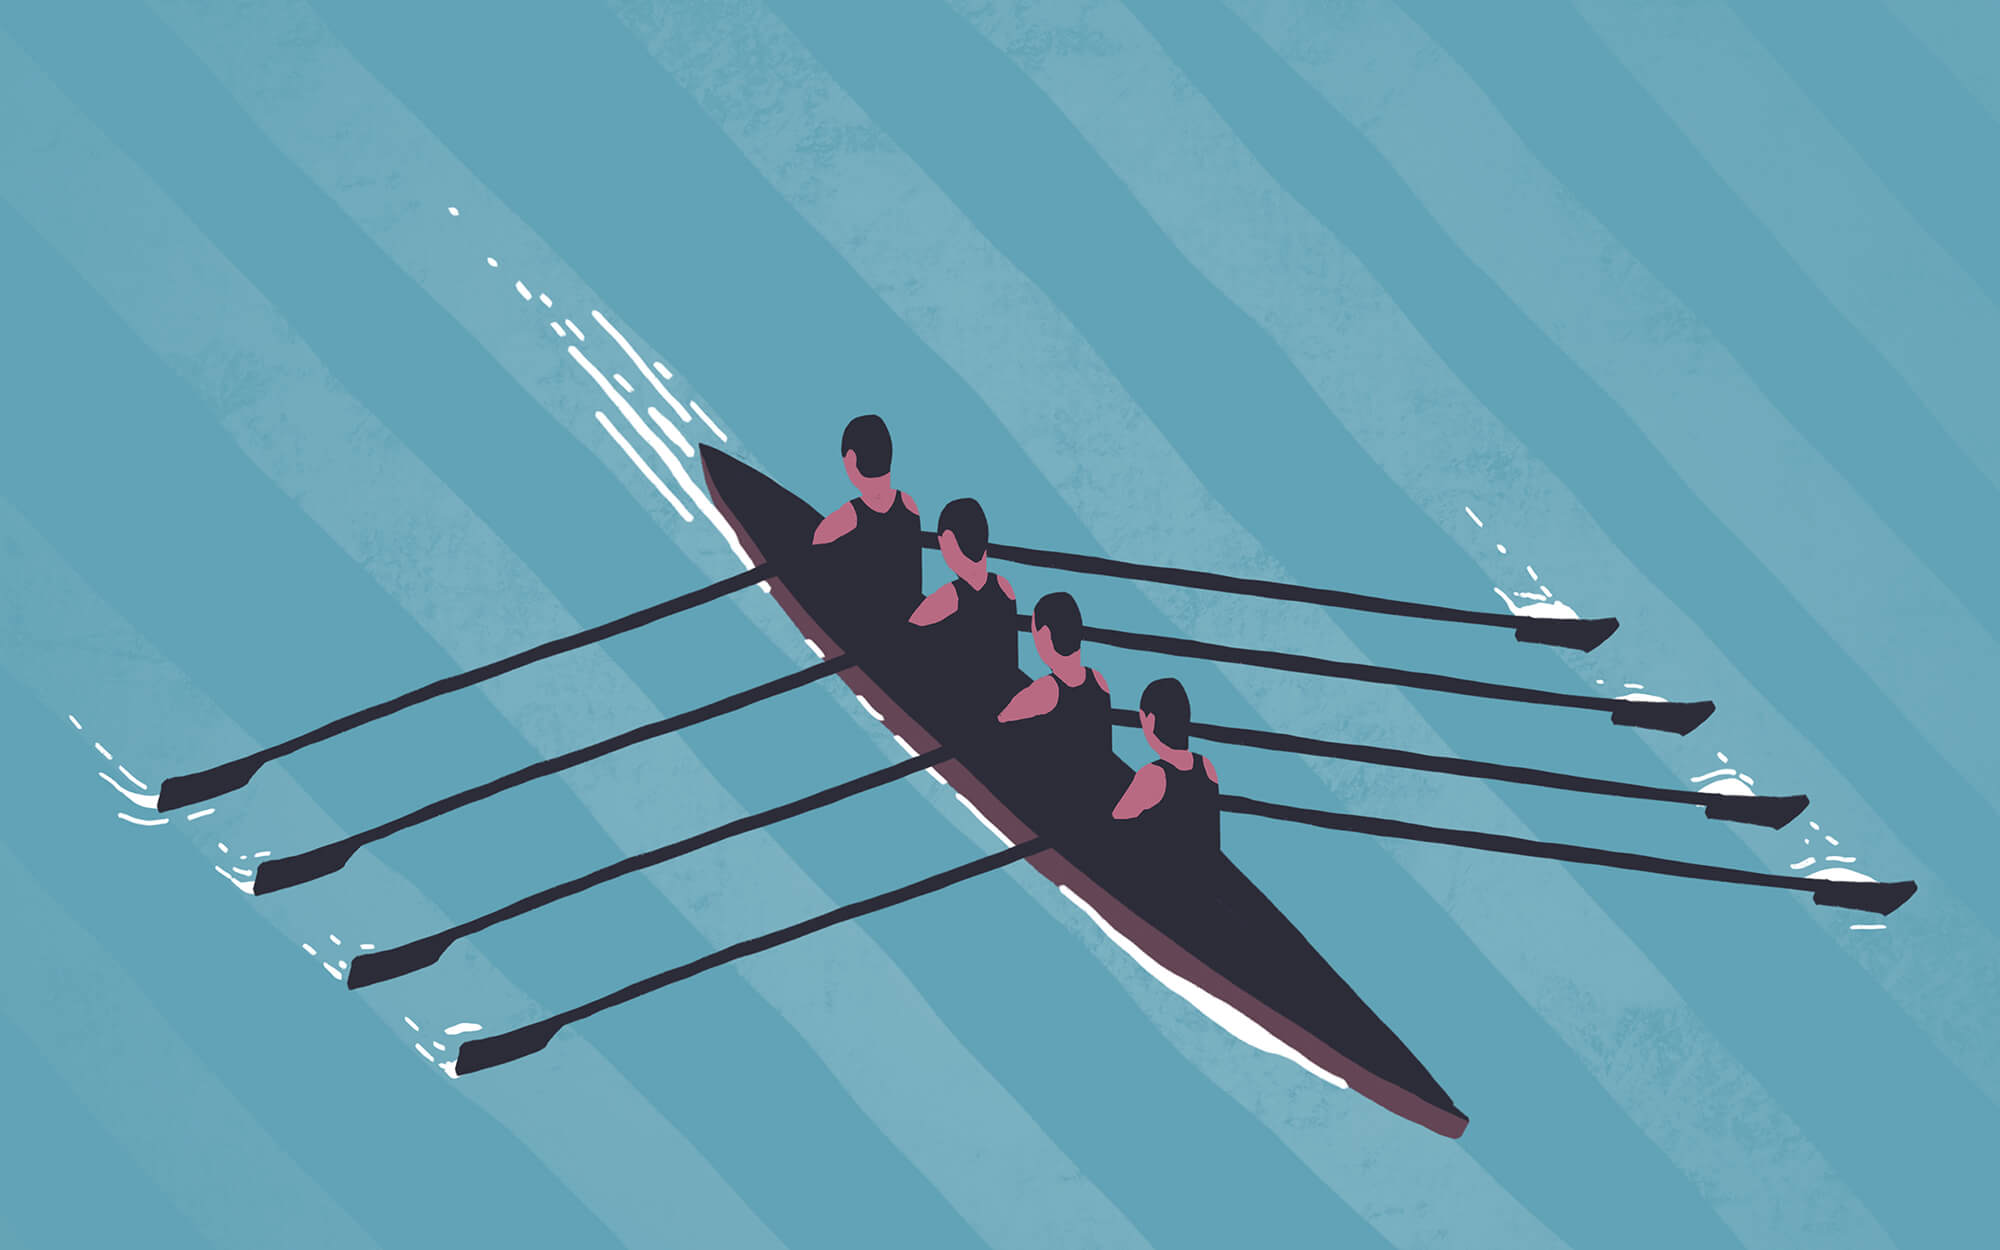 Rowers on water illustration